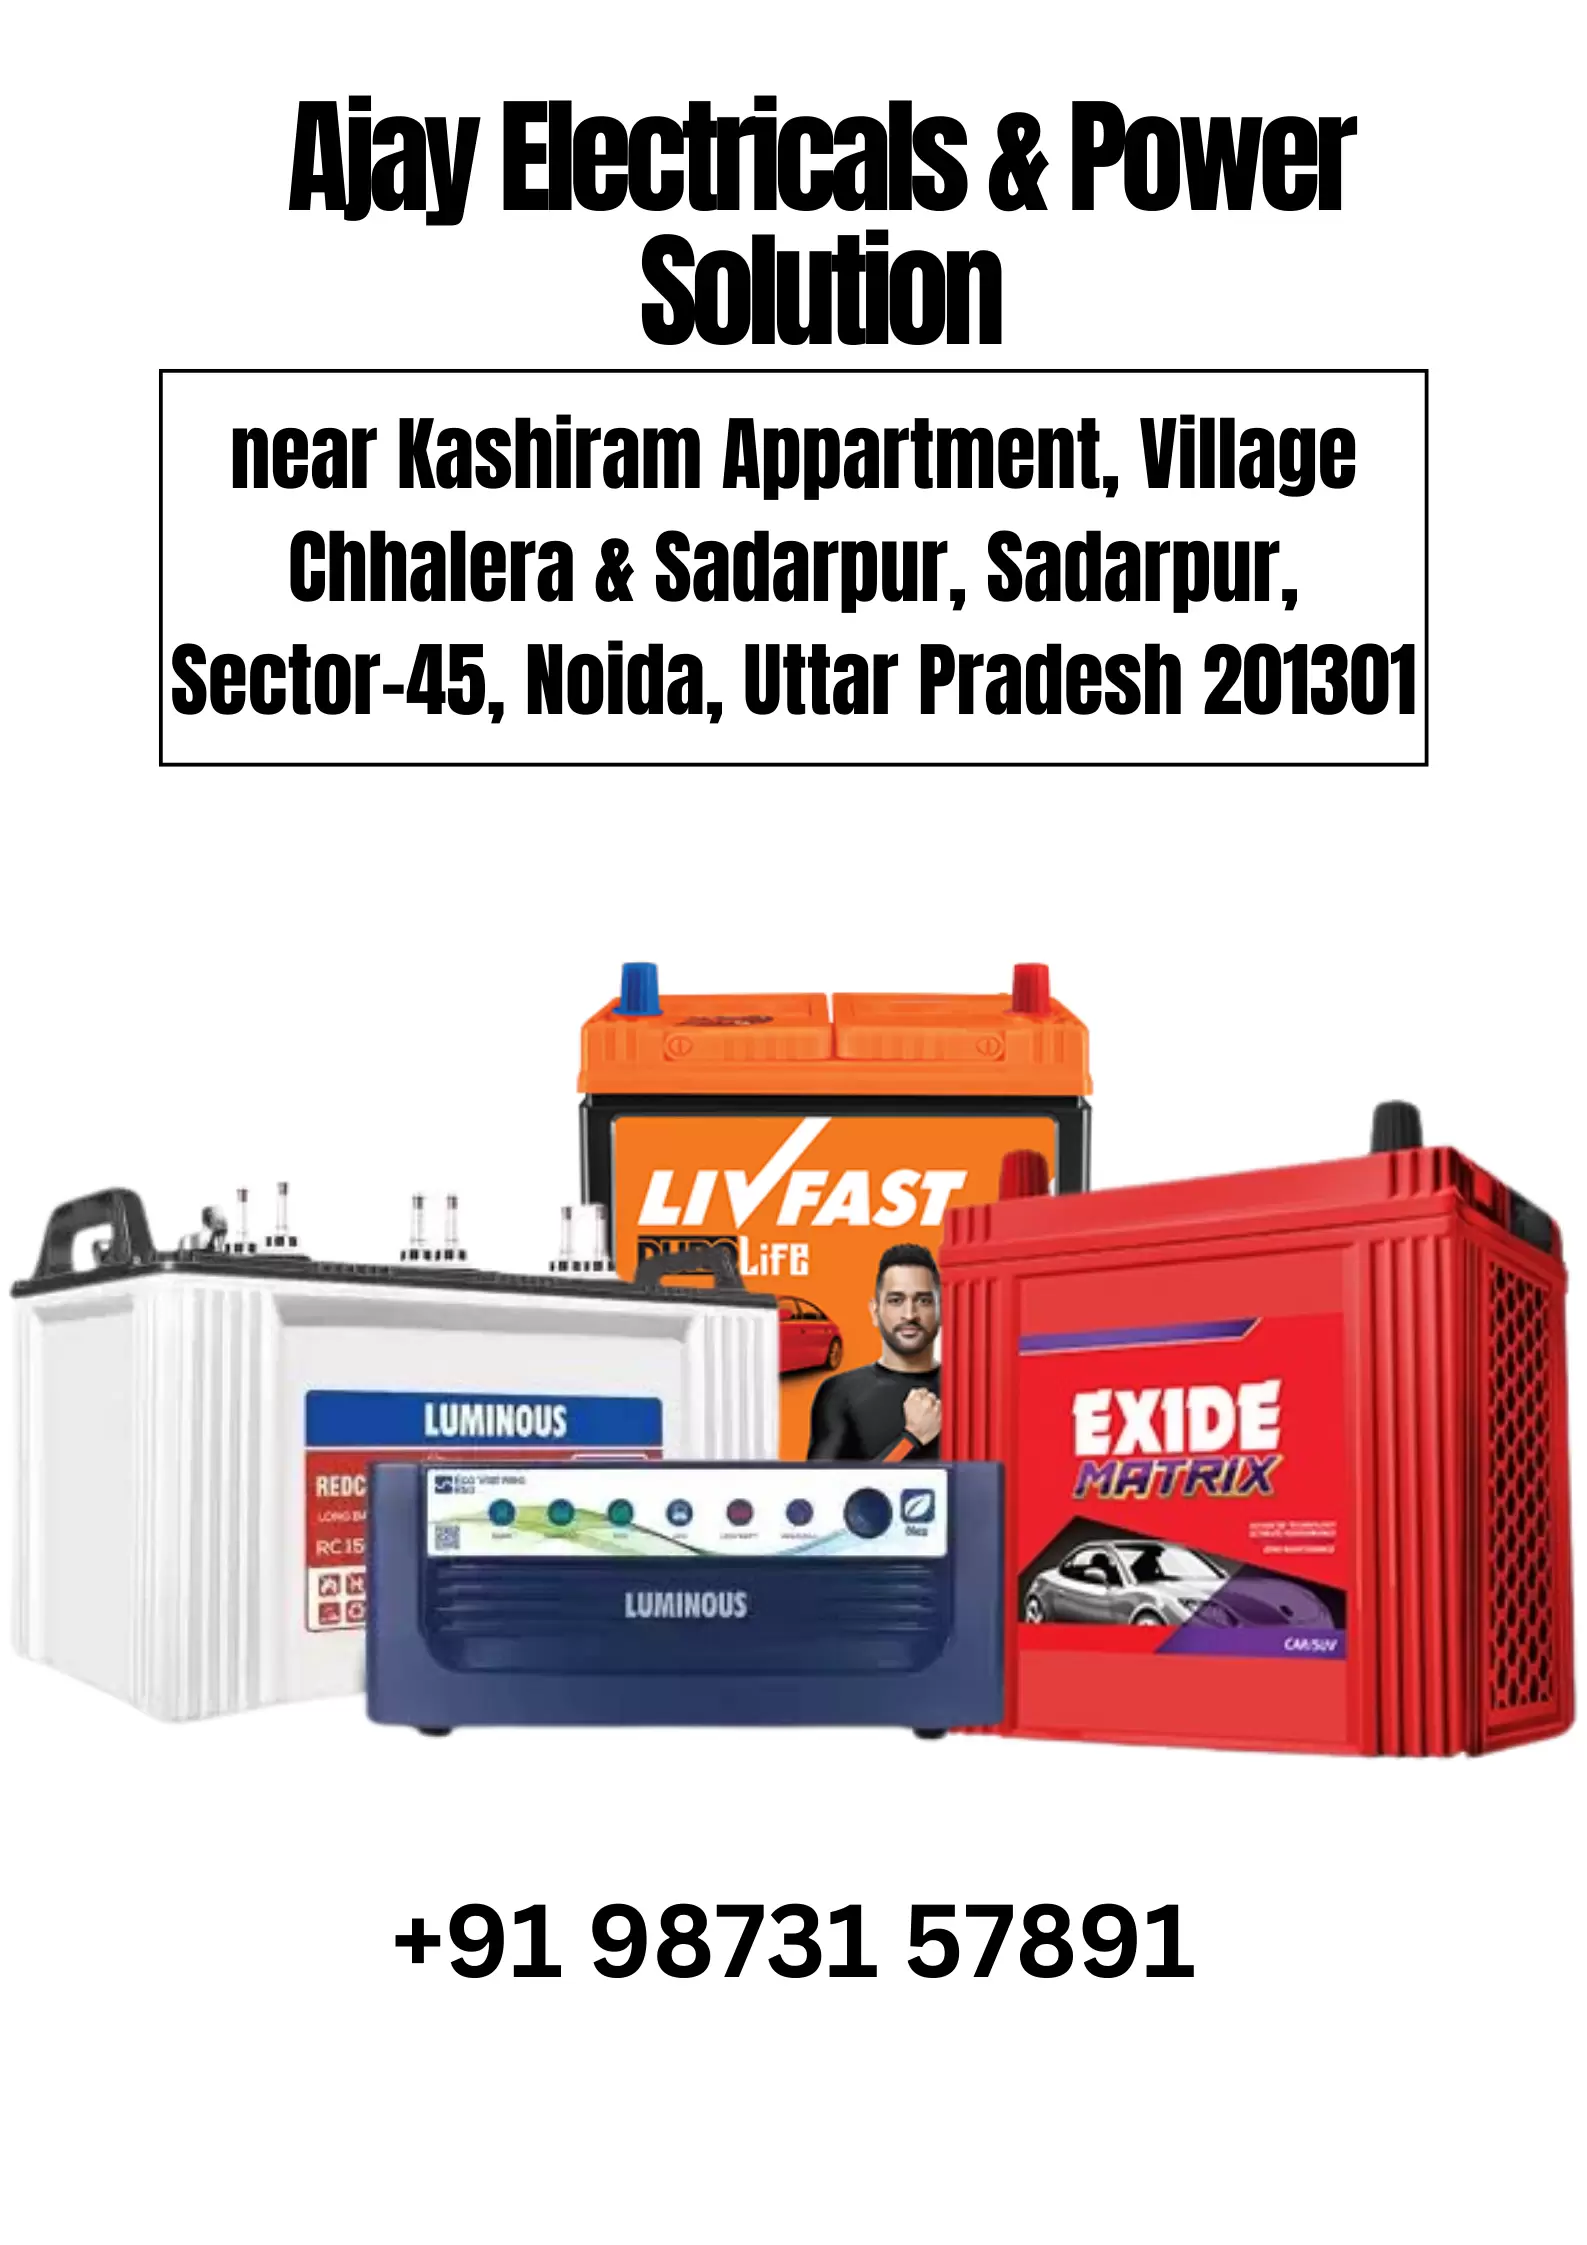 Ajay Electricals & Power